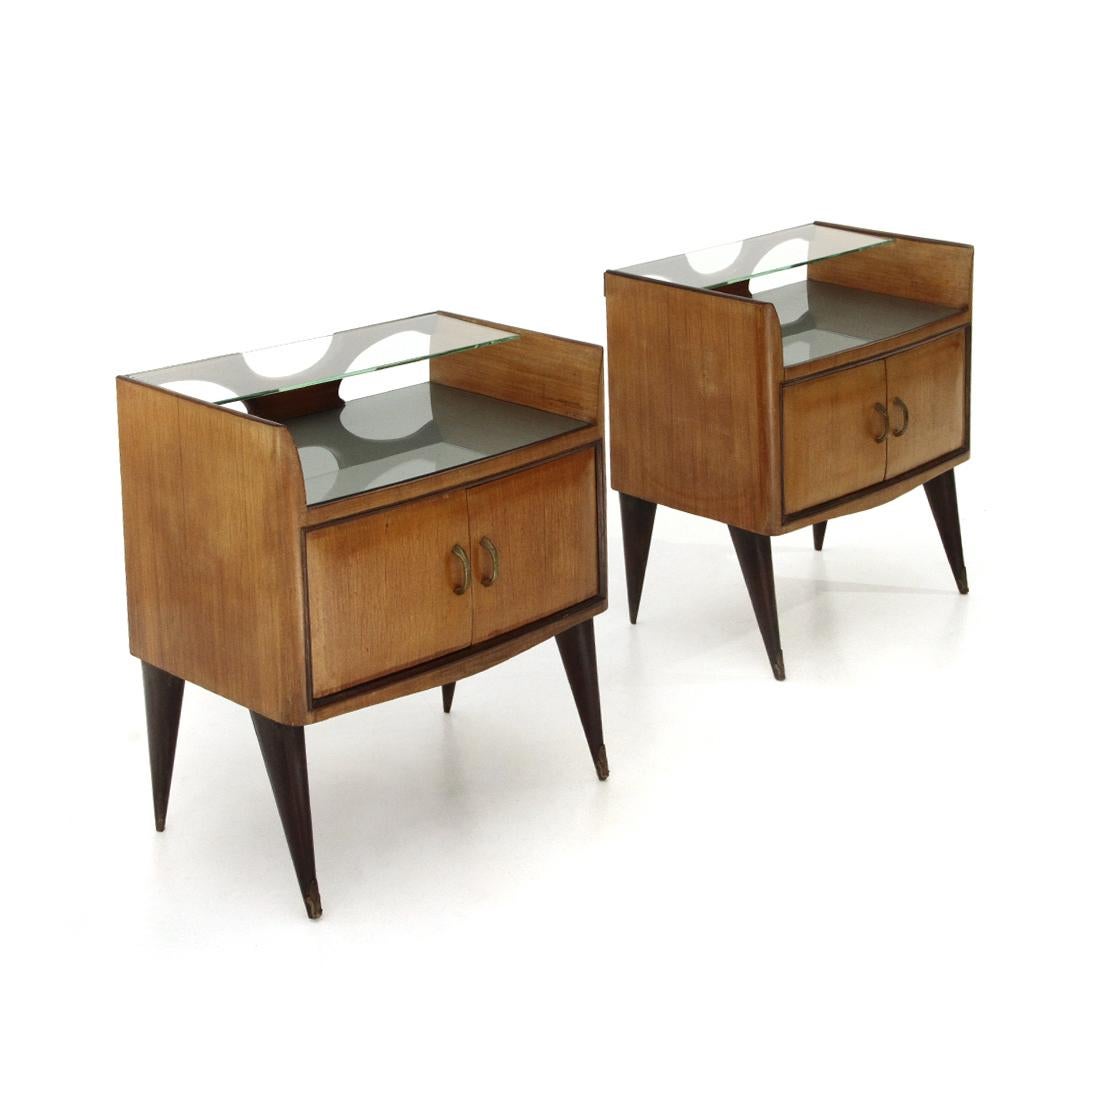 Pair of Italian-made bedside tables produced in the 1950s.
Structure in veneered wood.
Storage compartment with brass doors and handles.
Back-painted glass top.
Upper shelf in transparent glass.
Legs in dark brown stained wood with floral brass